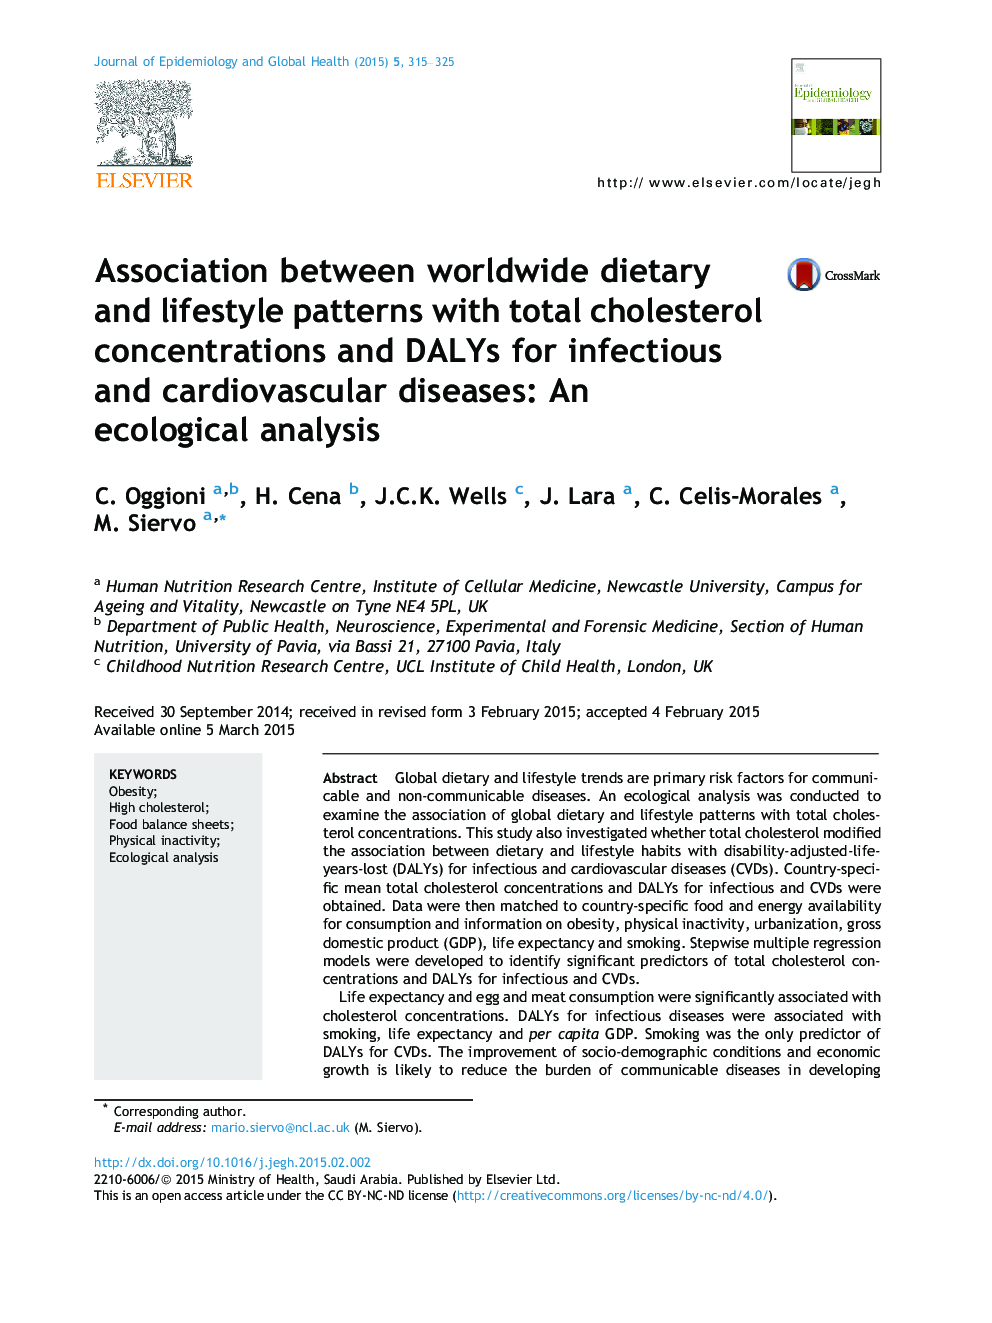 Association between worldwide dietary and lifestyle patterns with total cholesterol concentrations and DALYs for infectious and cardiovascular diseases: An ecological analysis